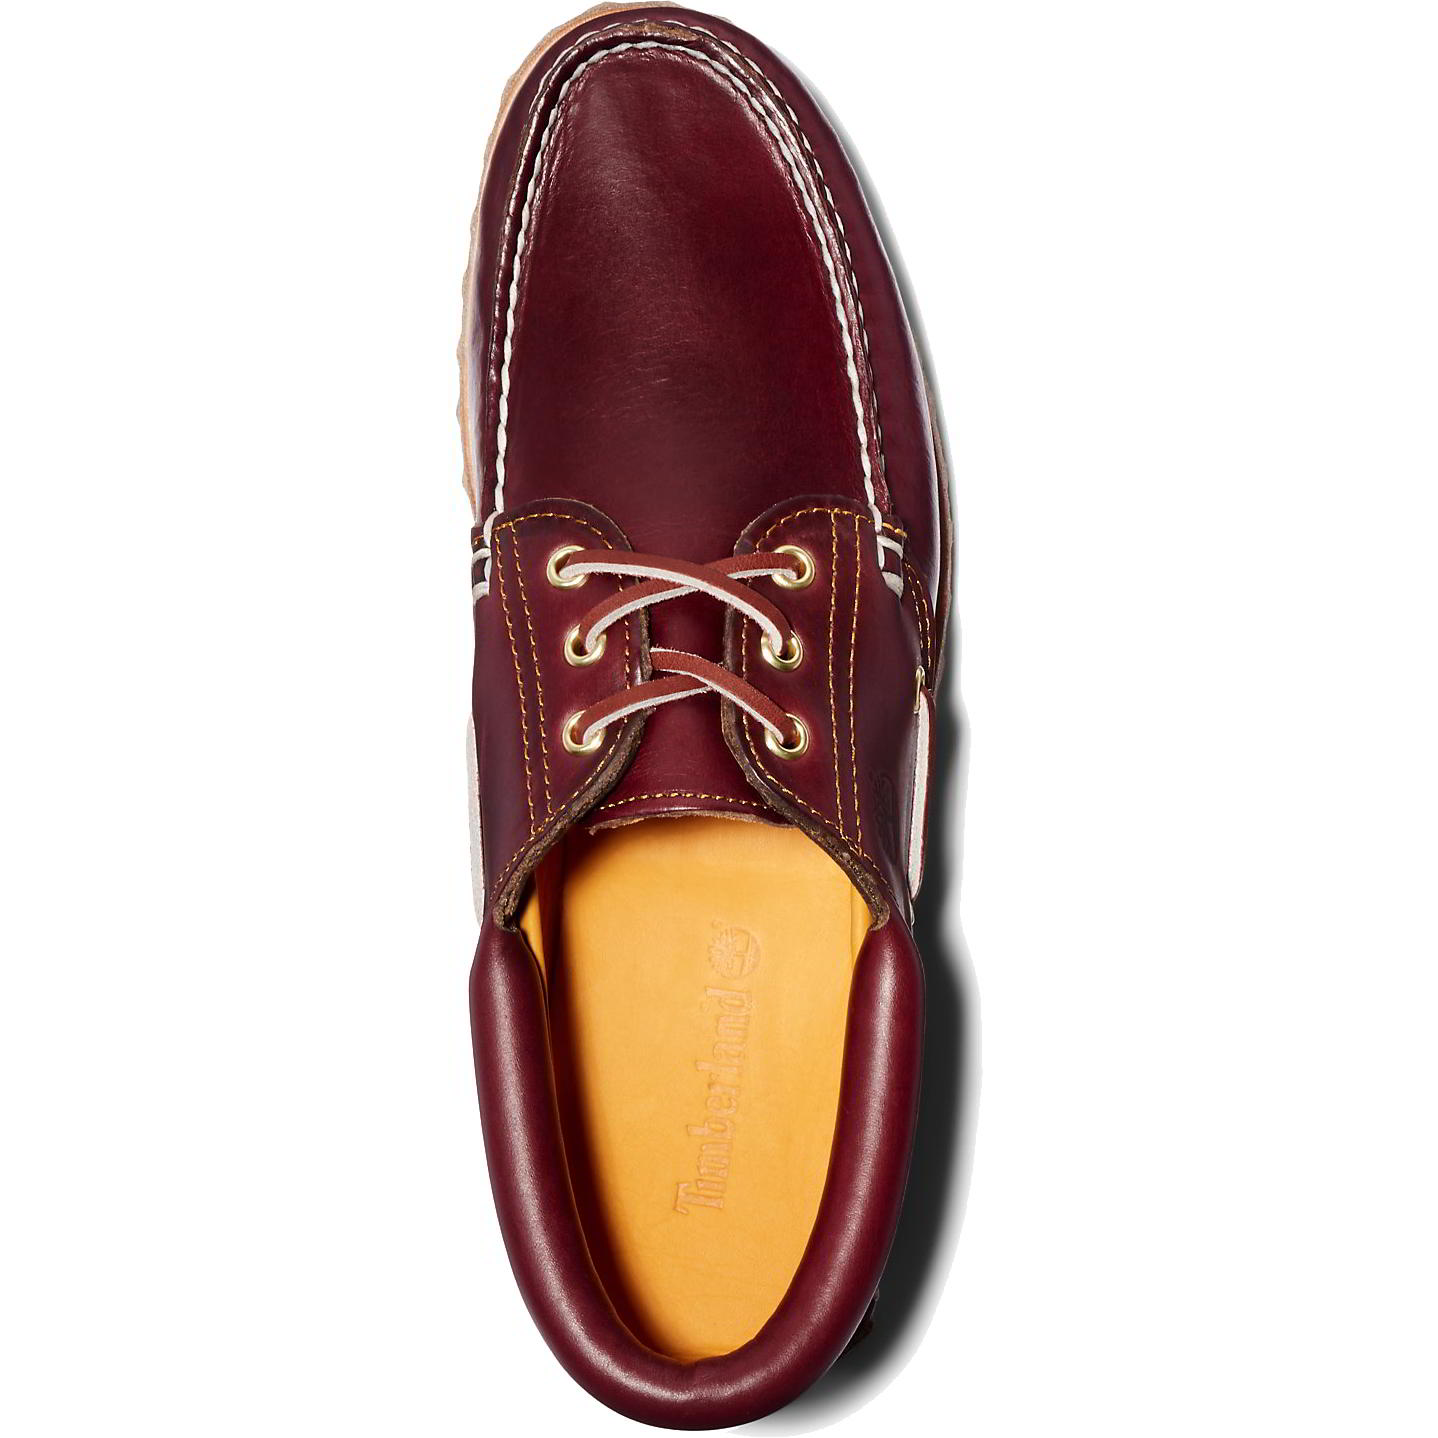 Timberland Mens Heritage Boat Shoes - 50009 Burgundy 2951